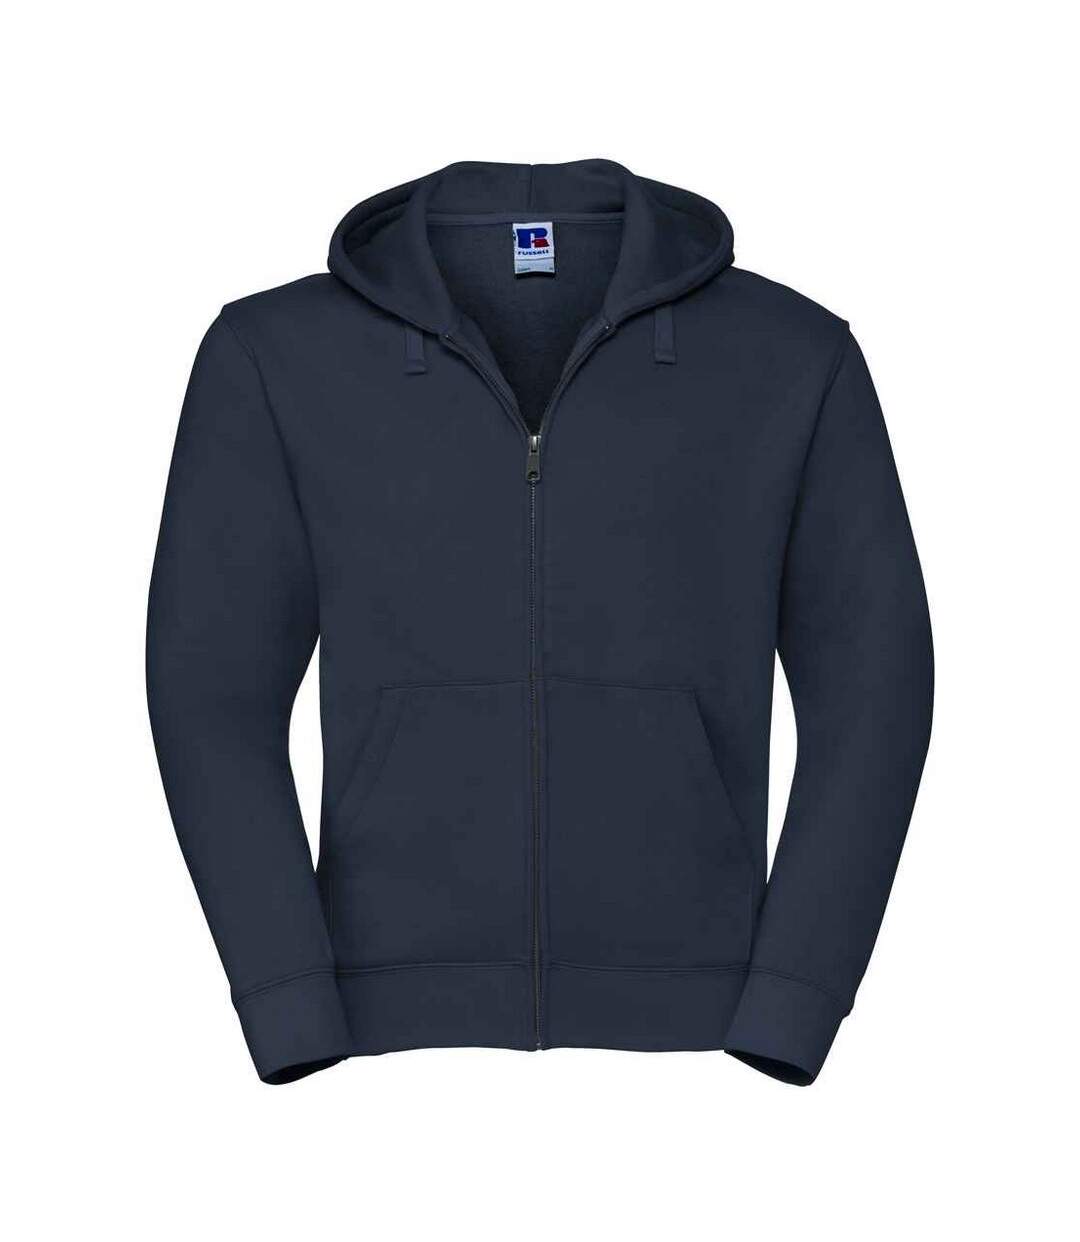 Russell Mens Authentic Hooded Sweatshirt (French Navy)